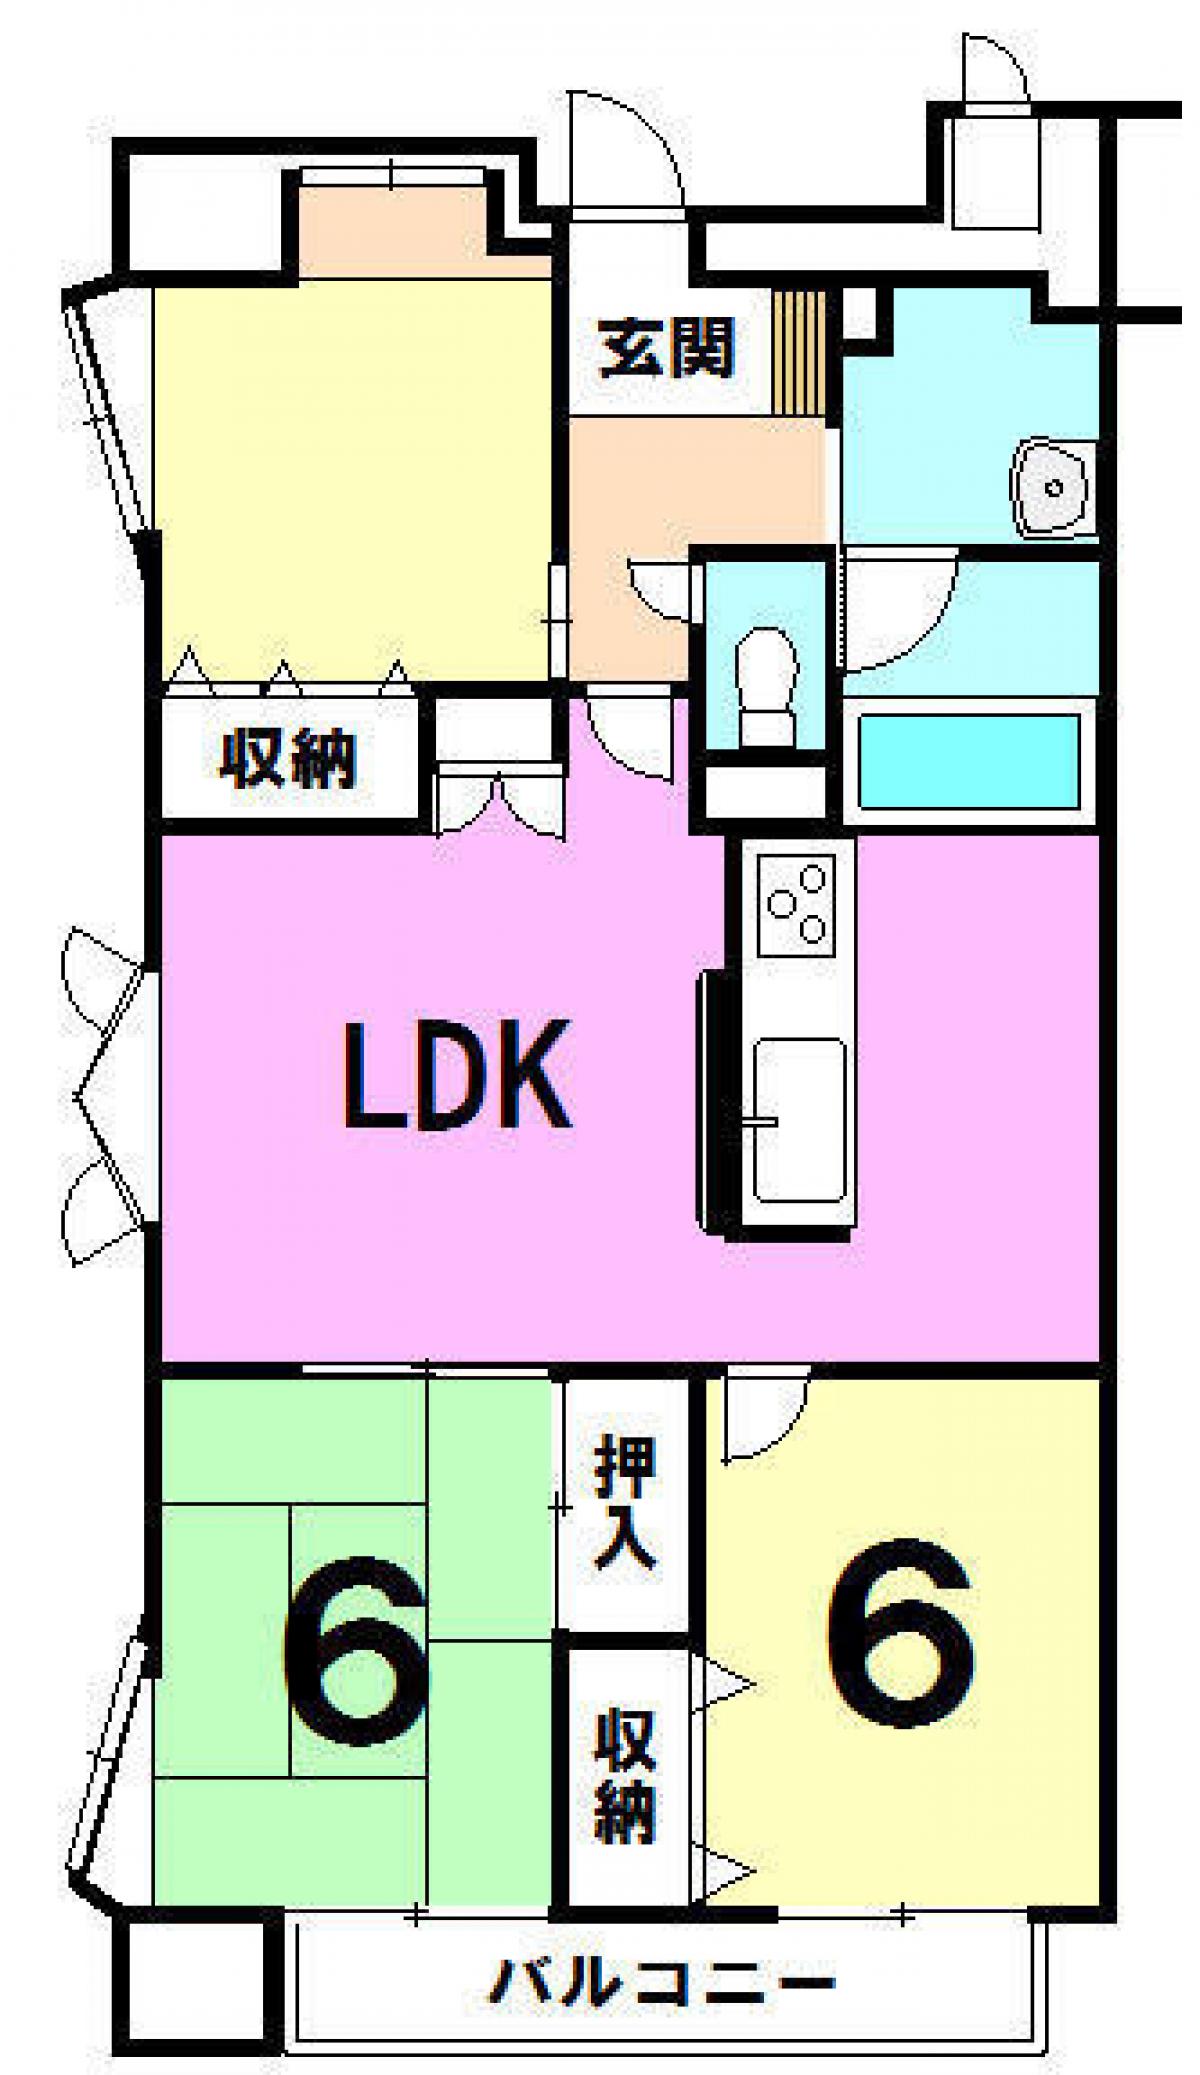 Picture of Apartment For Sale in Maizuru Shi, Kyoto, Japan